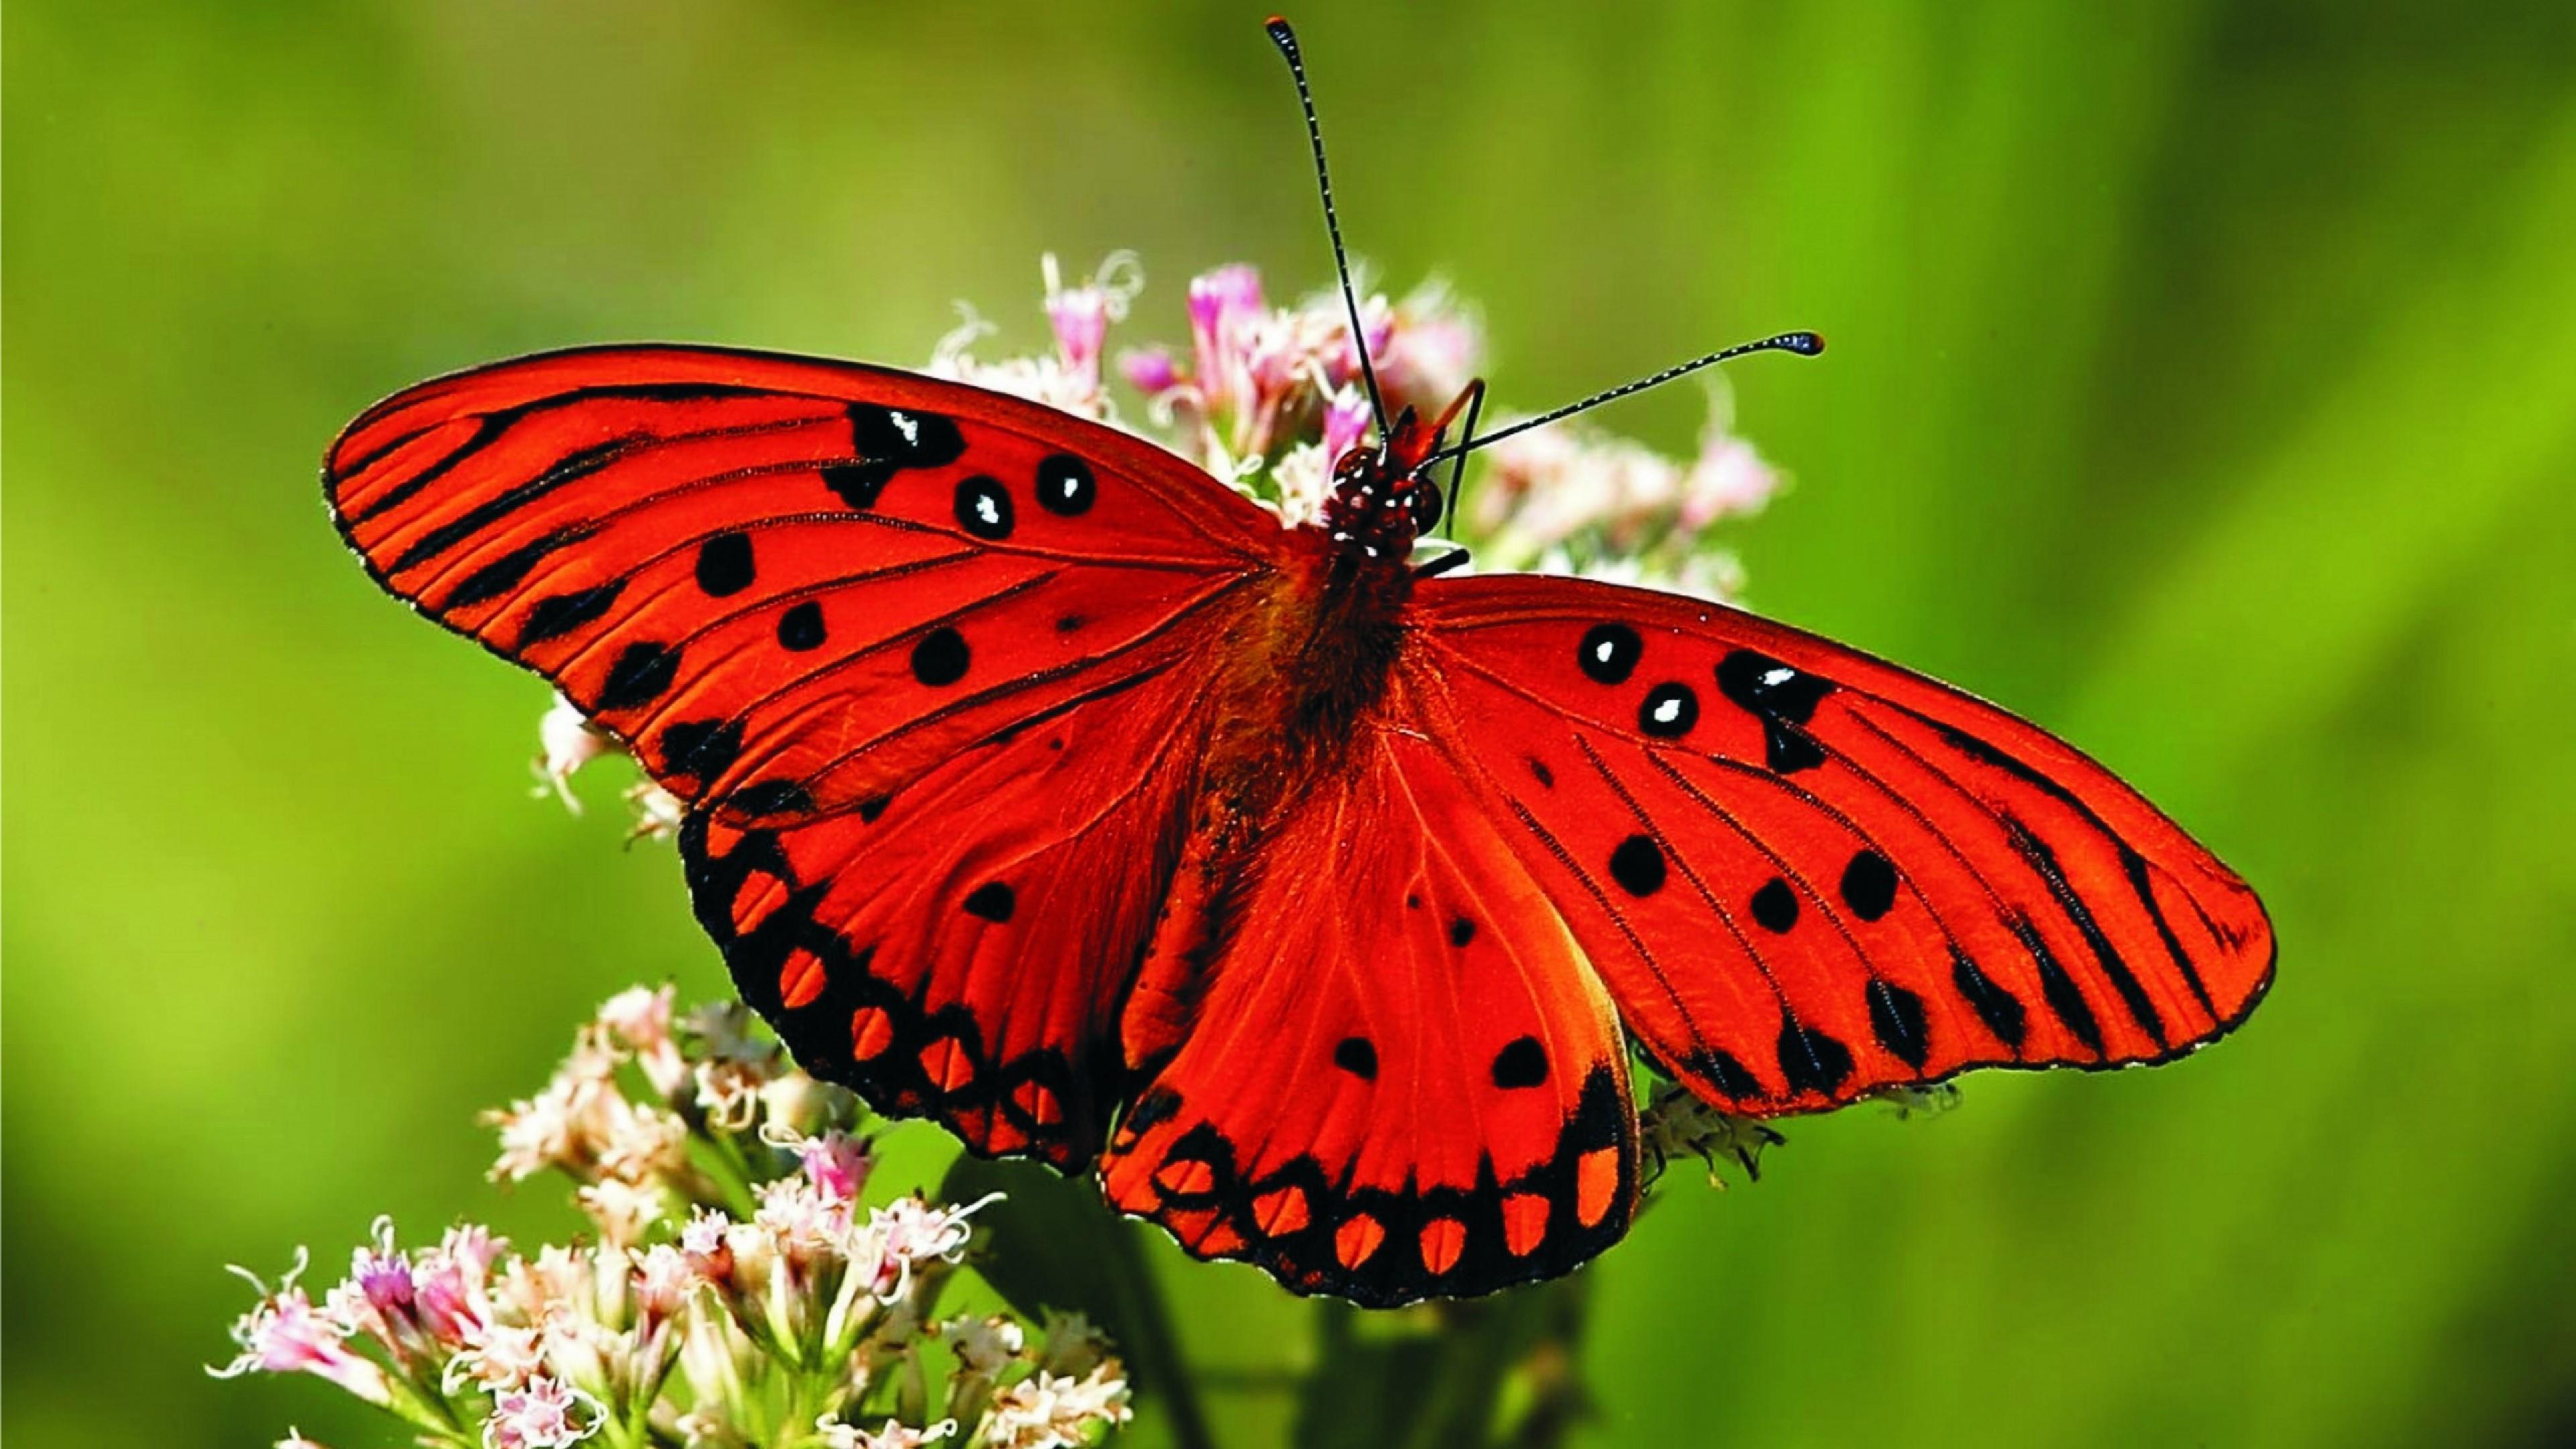 Red Butterfly Hd Wallpapers